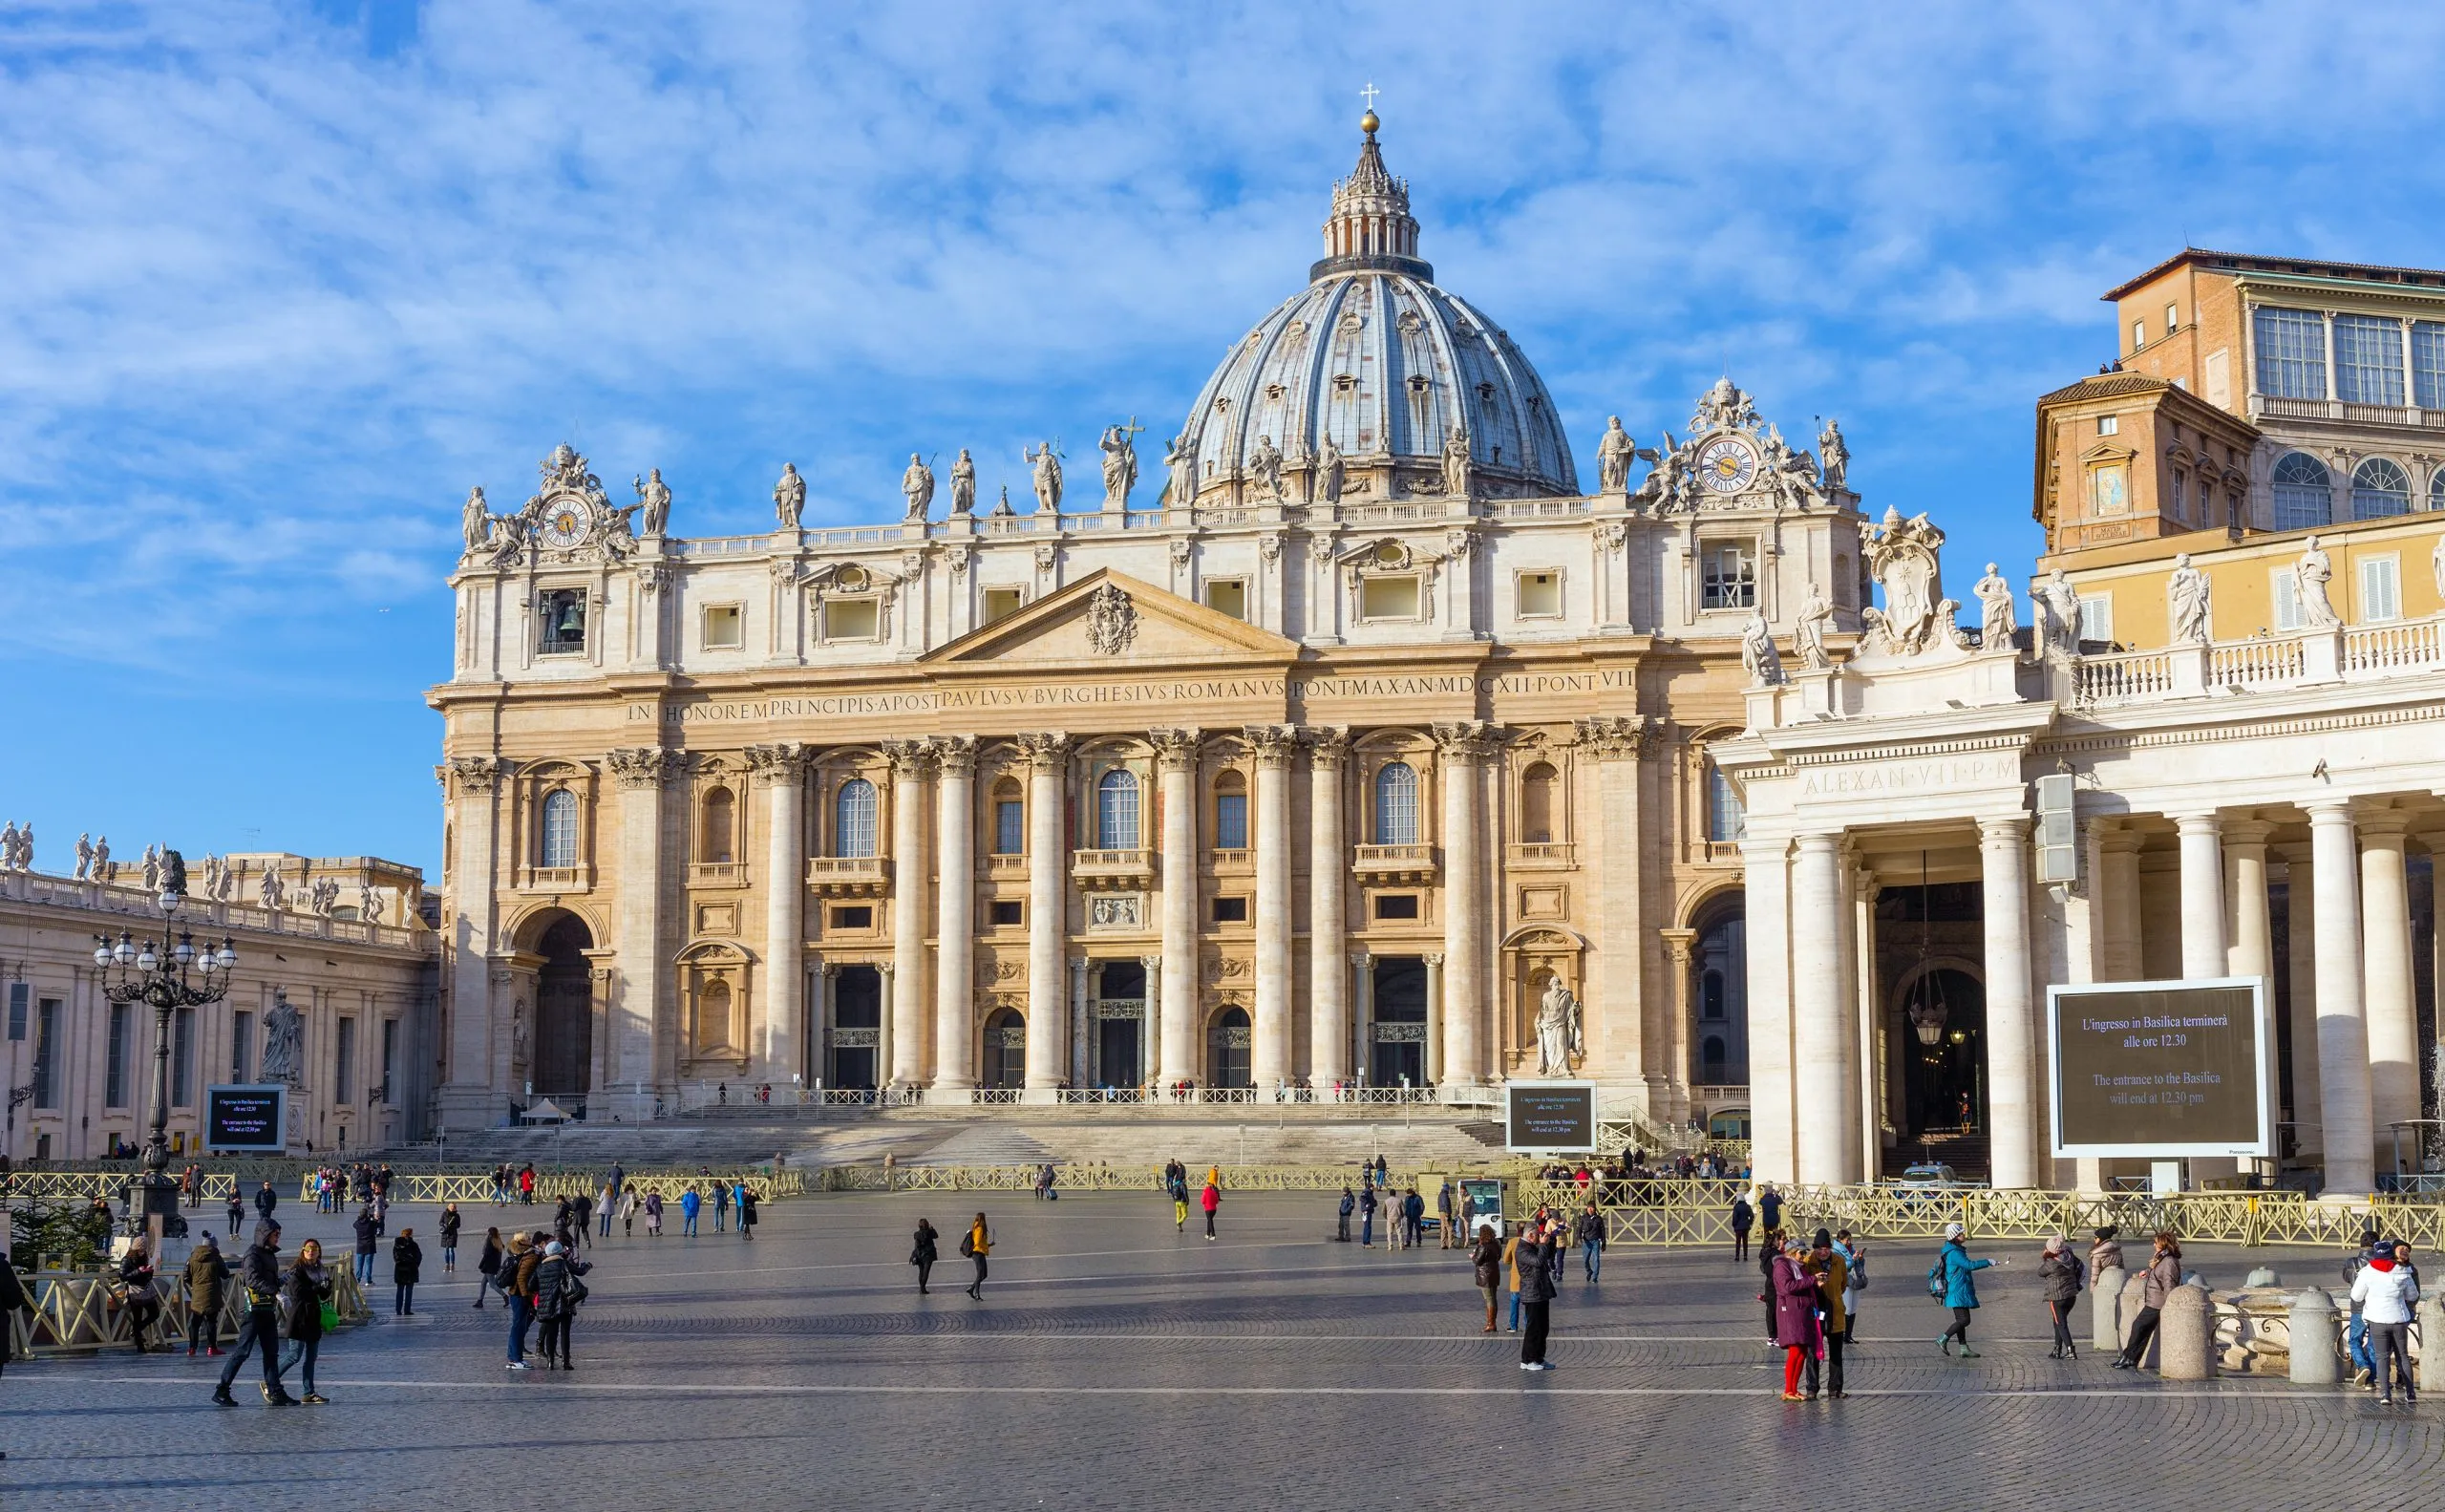 Rome, Italy - December 31, 2016: St. Peter's Basilica facade in Rome, Italy. St. Peter's is the most renowned work of Renaissance architecture and one of the largest churches in the world.